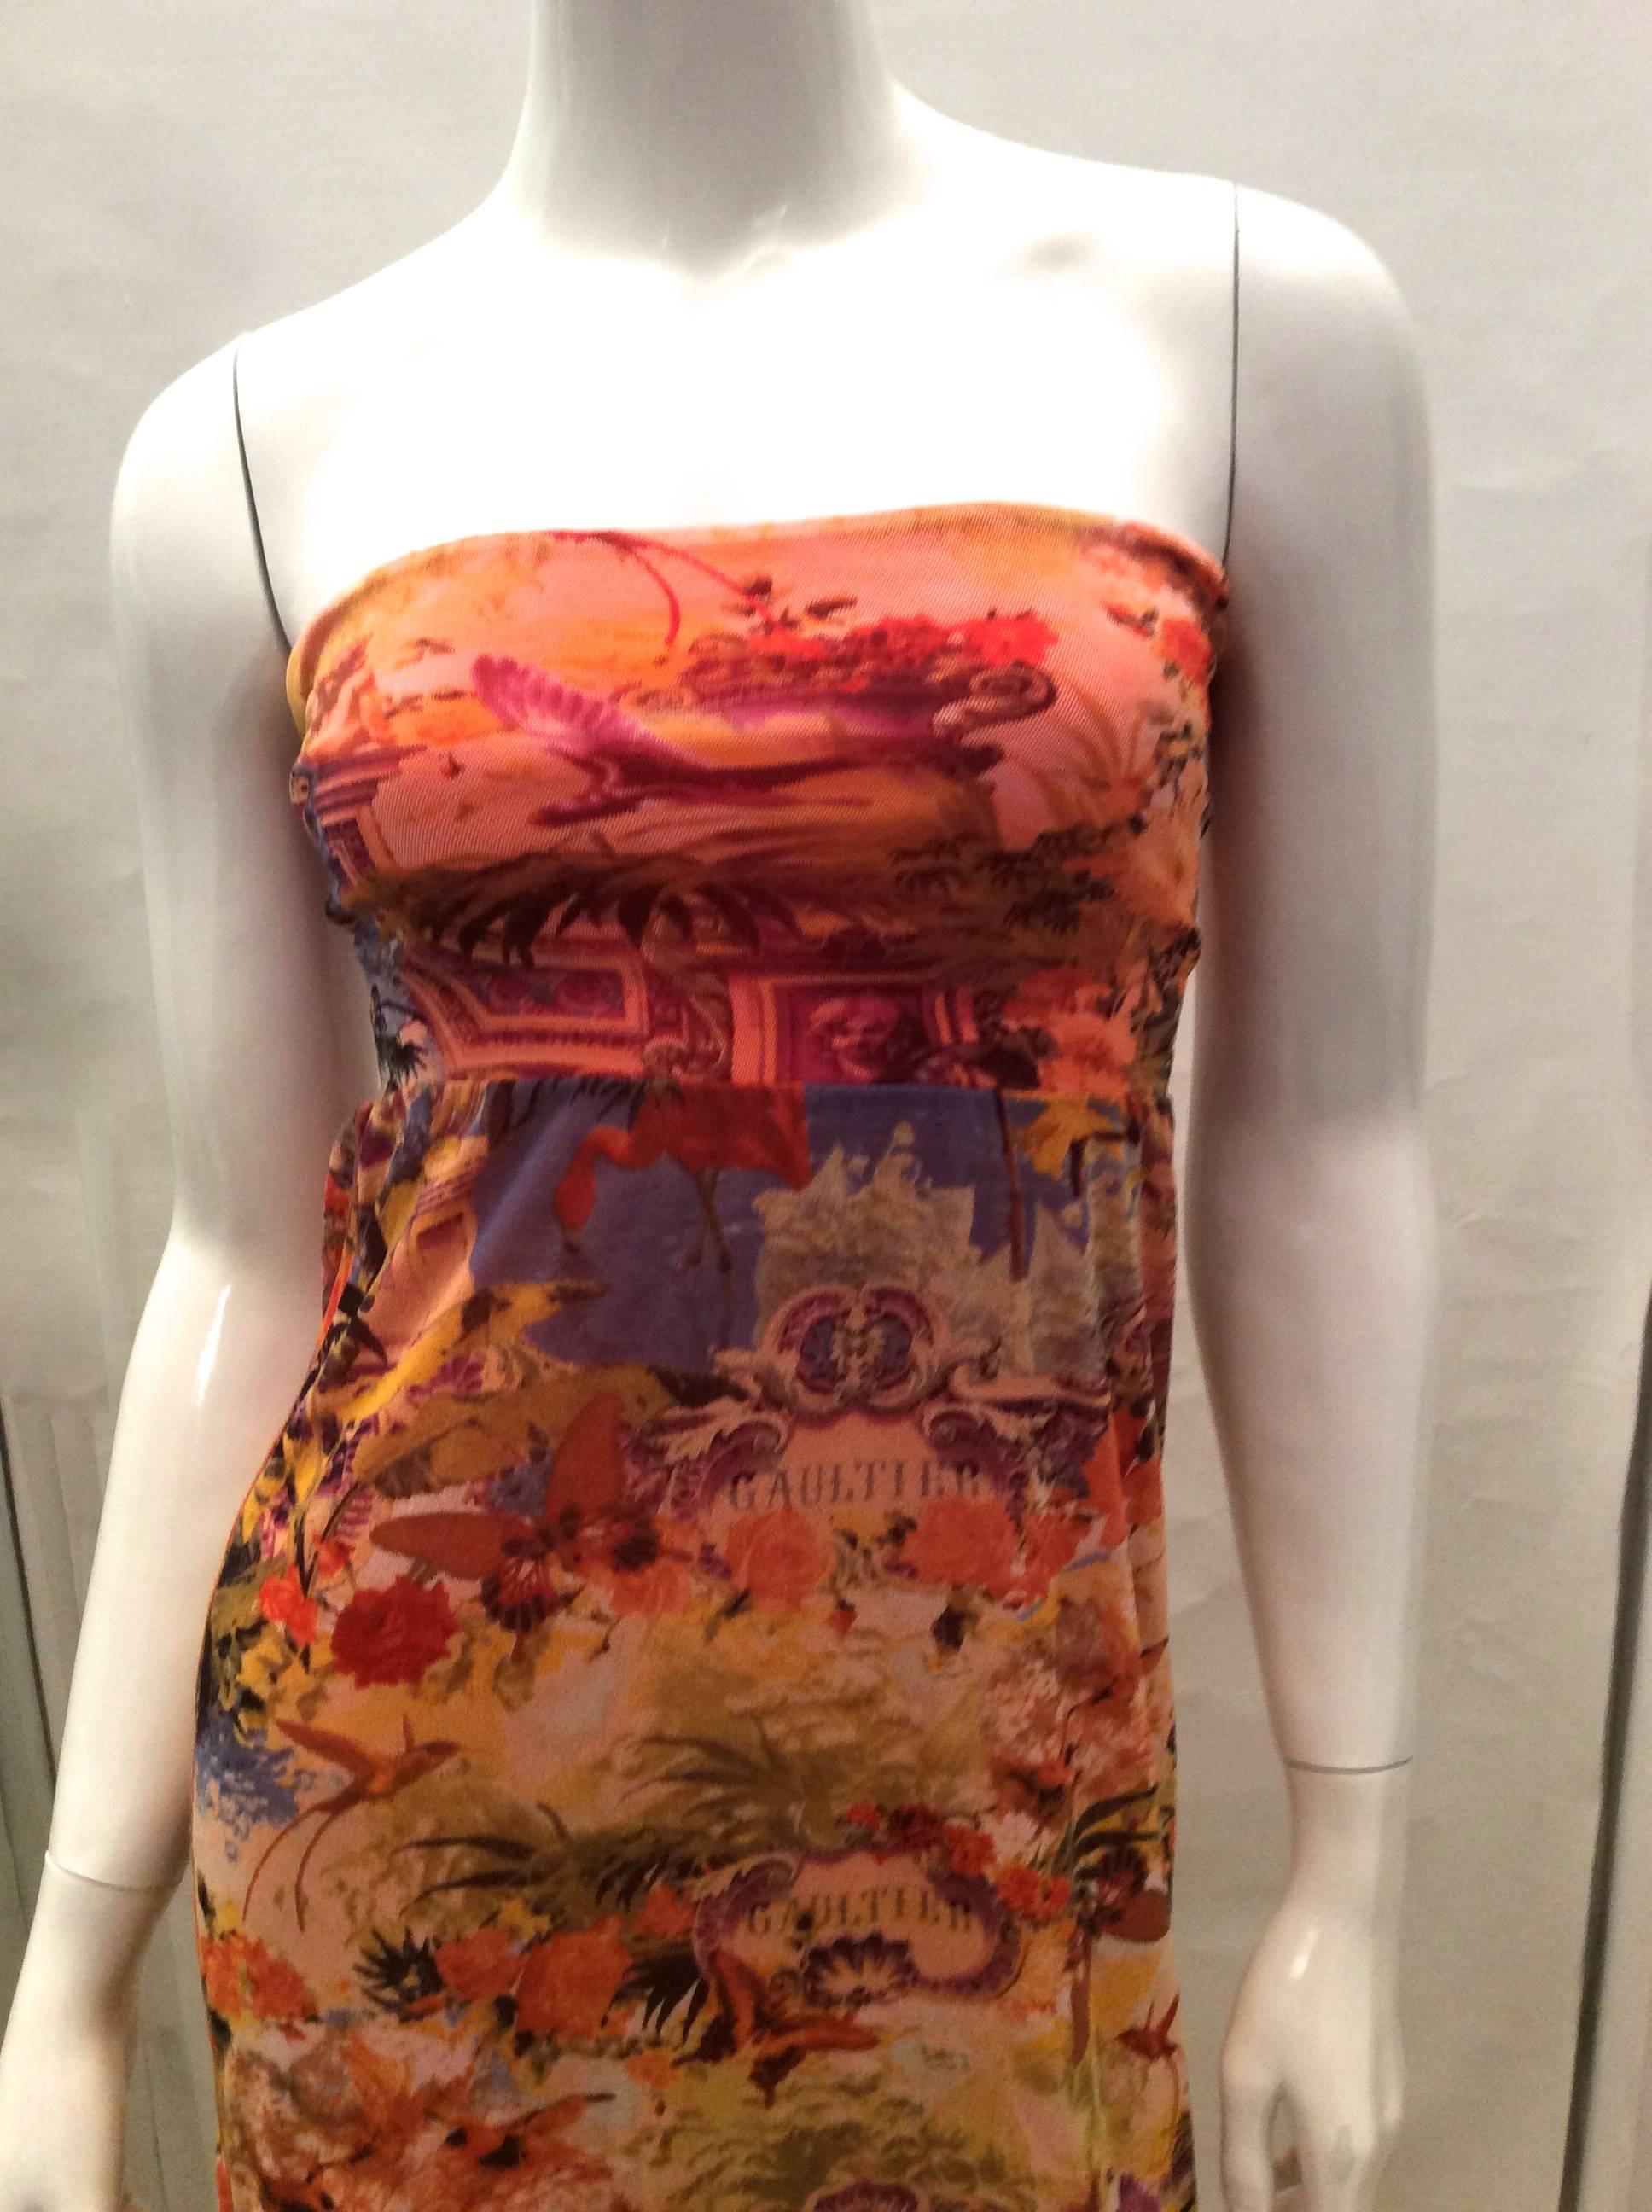 This Gautier Floral Mesh Size Small is a fabulous summer skirt or a halter dress. Can be worn to the beach or on a lovely summer afternoon. The typical mesh Gautier print encompasses butterflies, vases, floral arrangements, Gautier signature,